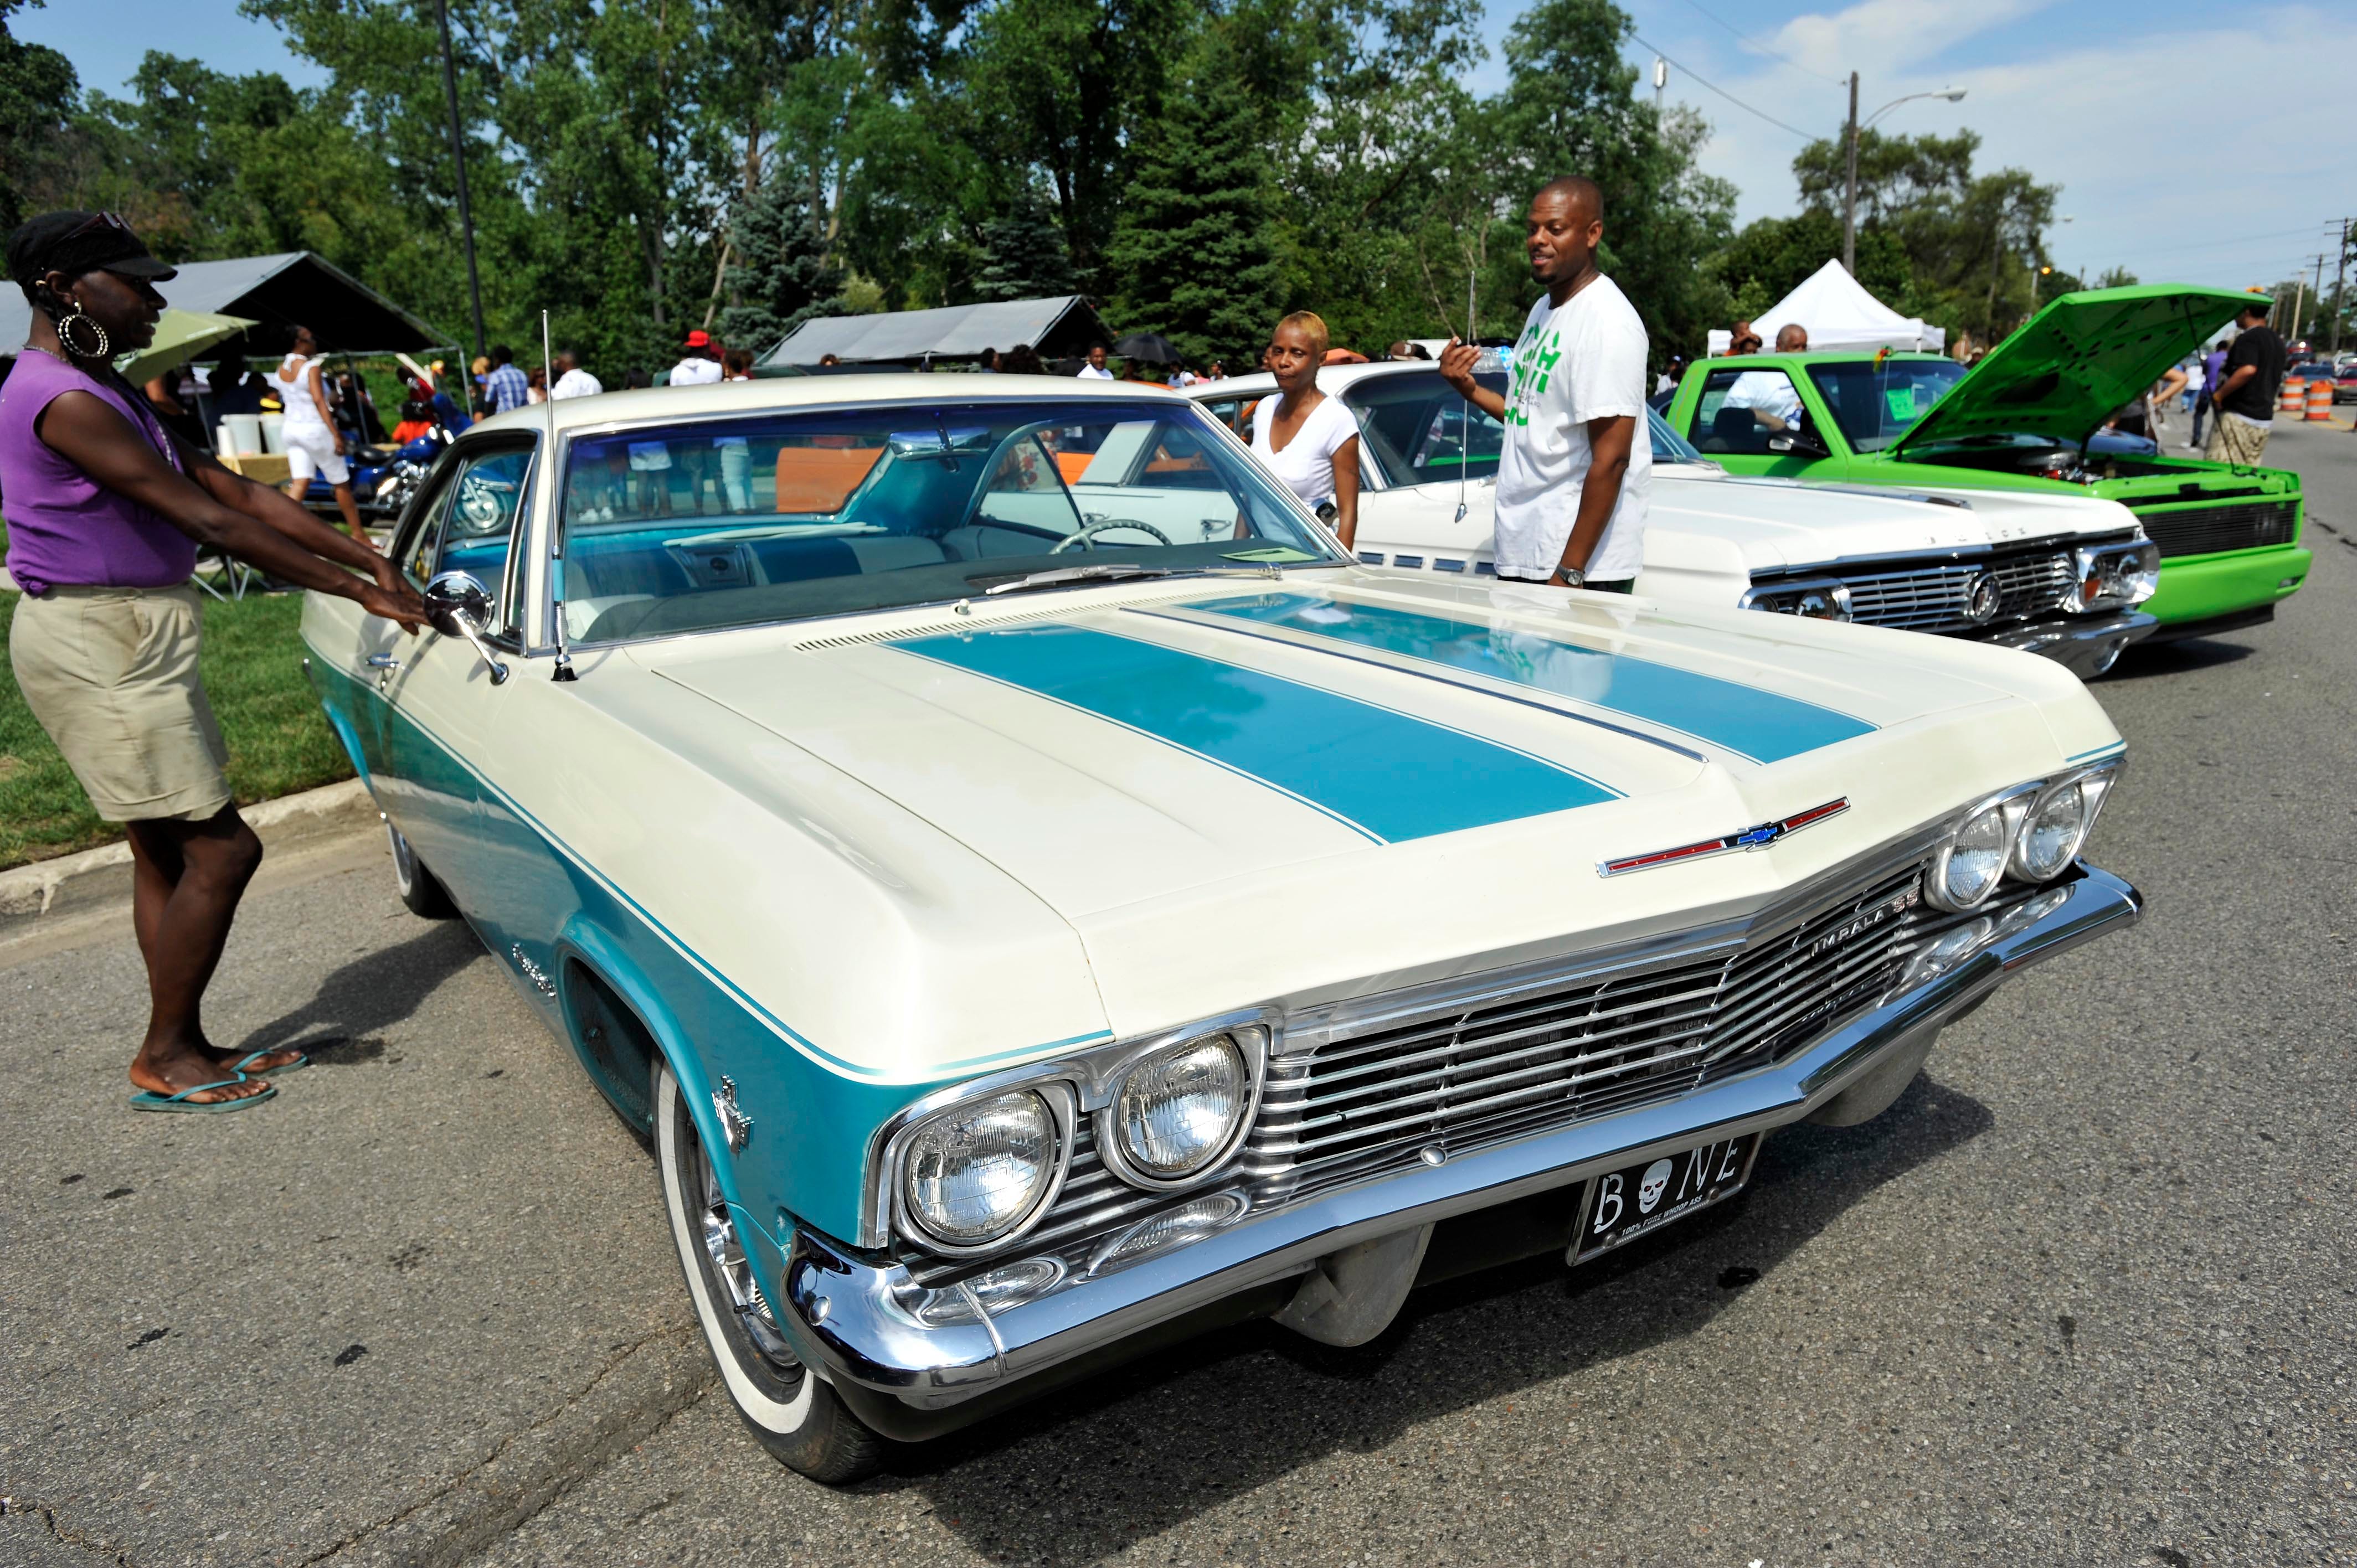 Alonda Hagood, left, and Jackie Good, center, both of Detroit, check out Bernard Hatcher's 1965 Chevrolet Impala on display during the 50th Greater Grace Temple Block Party, Saturday, July 21, 2012.